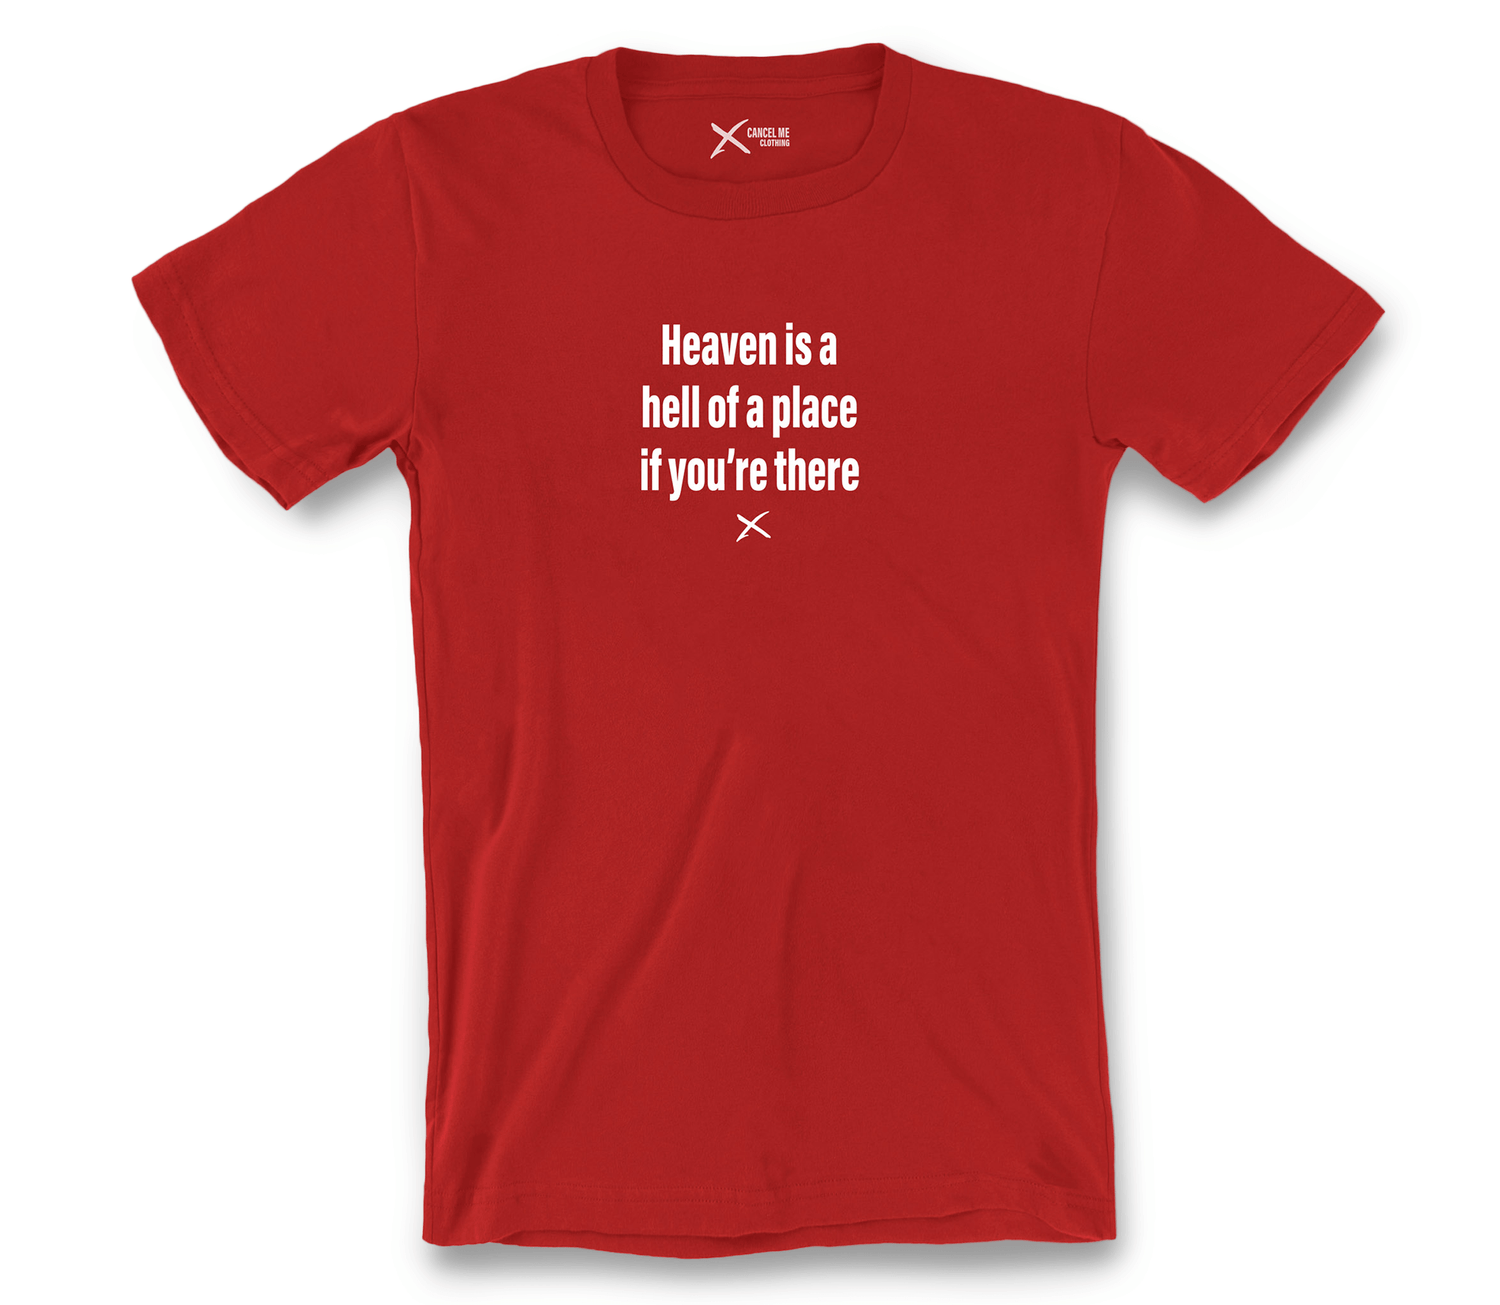 lp-religion_3-shirt_7792004825258_heaven-is-a-hell-of-a-place-if-youre-there-shirt_Red.png